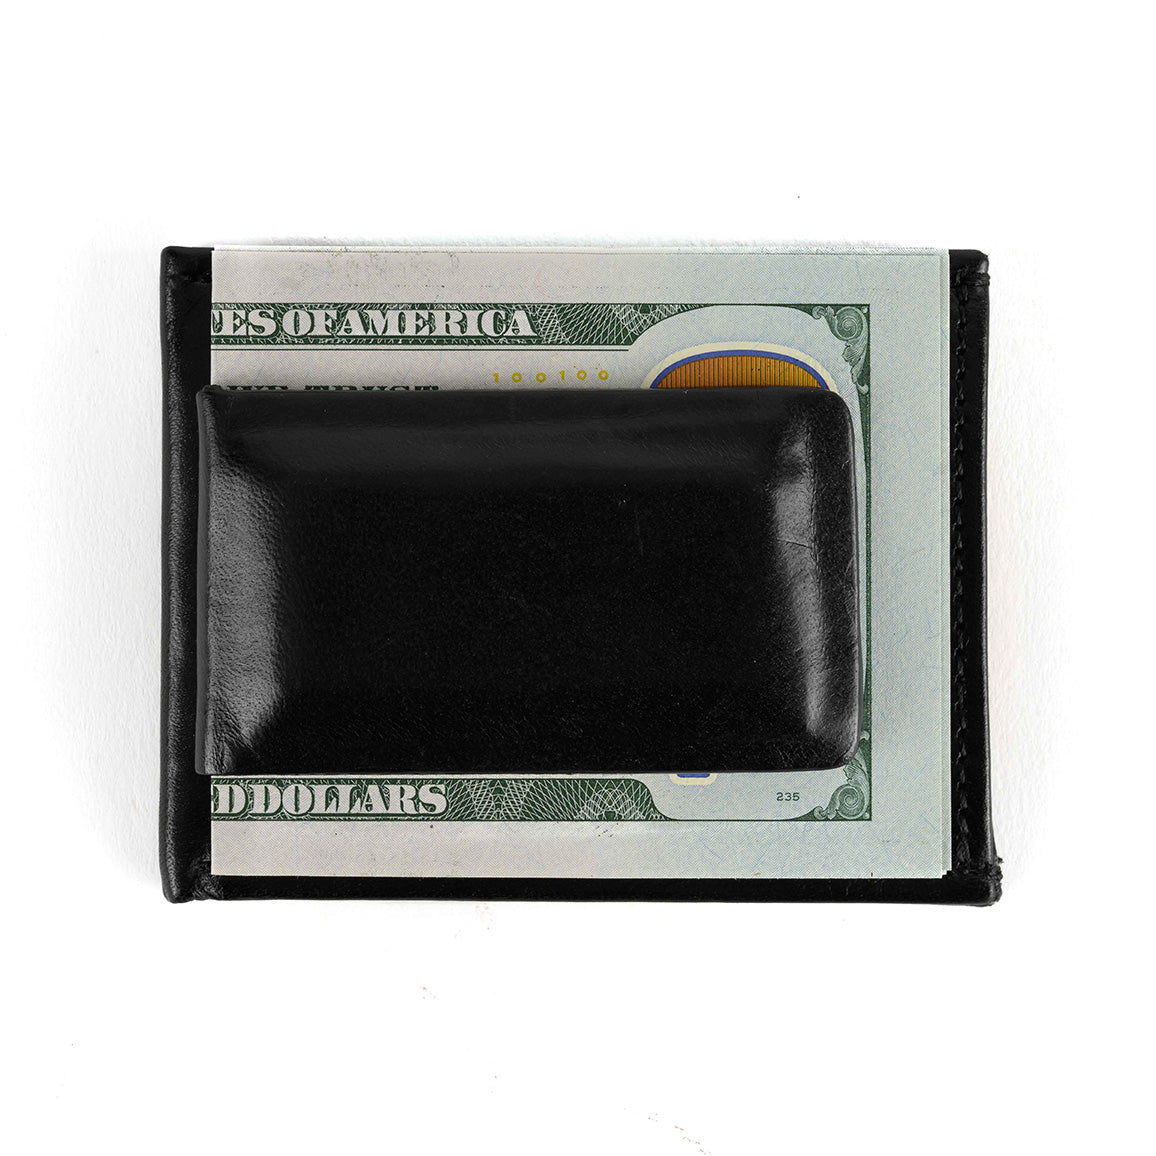 Moore and Giles Non Stitch Magnetic Money Clip in Brompton Black